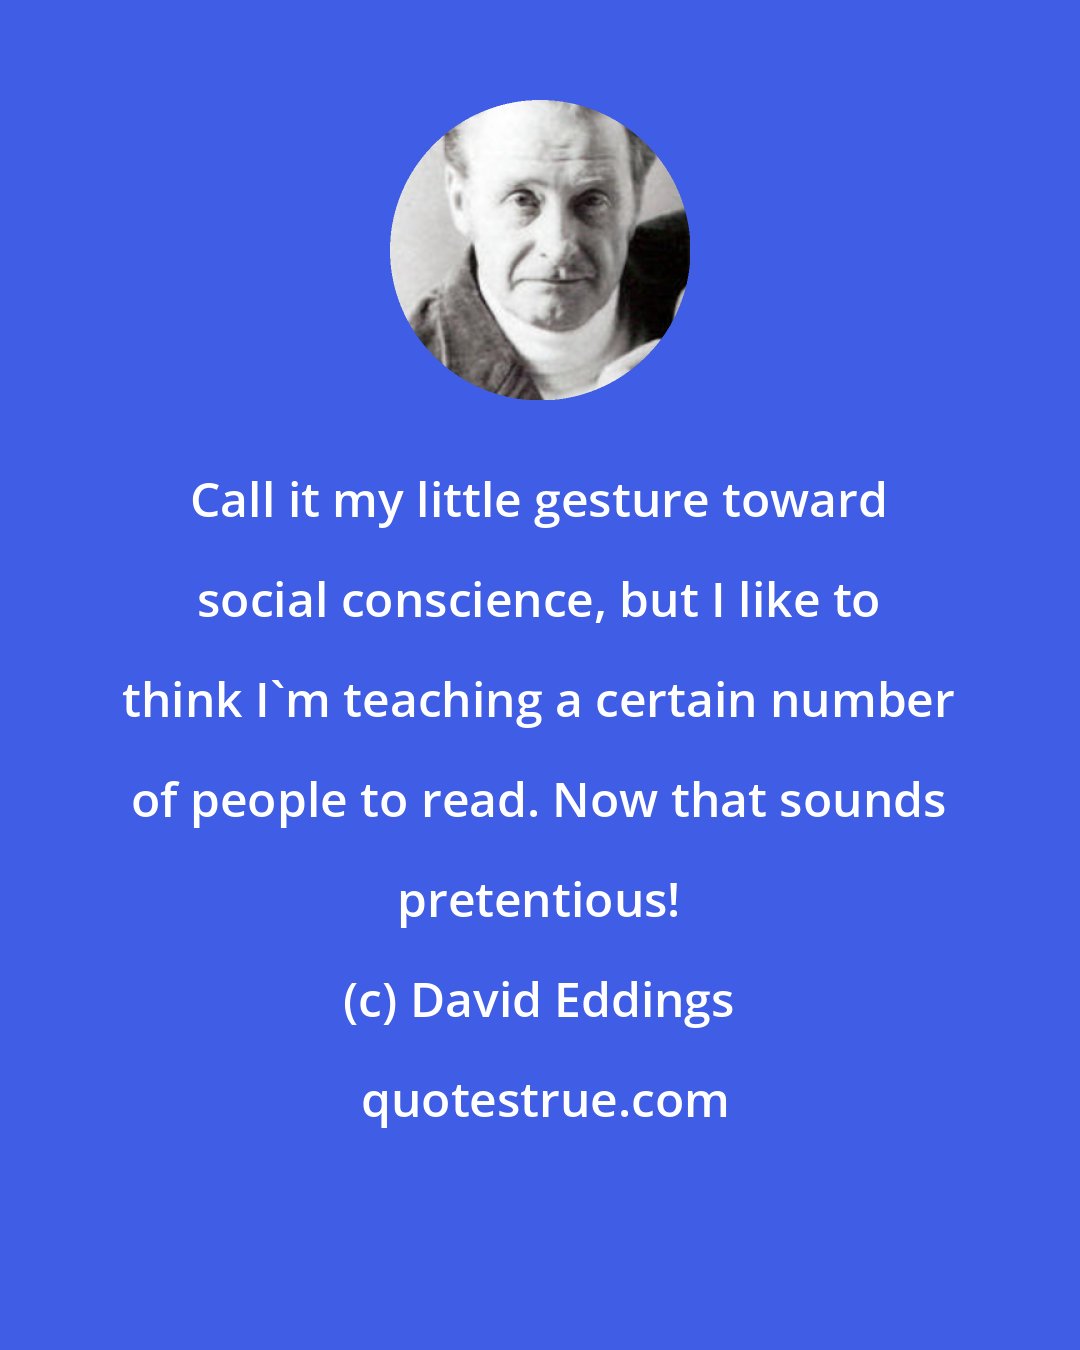 David Eddings: Call it my little gesture toward social conscience, but I like to think I'm teaching a certain number of people to read. Now that sounds pretentious!